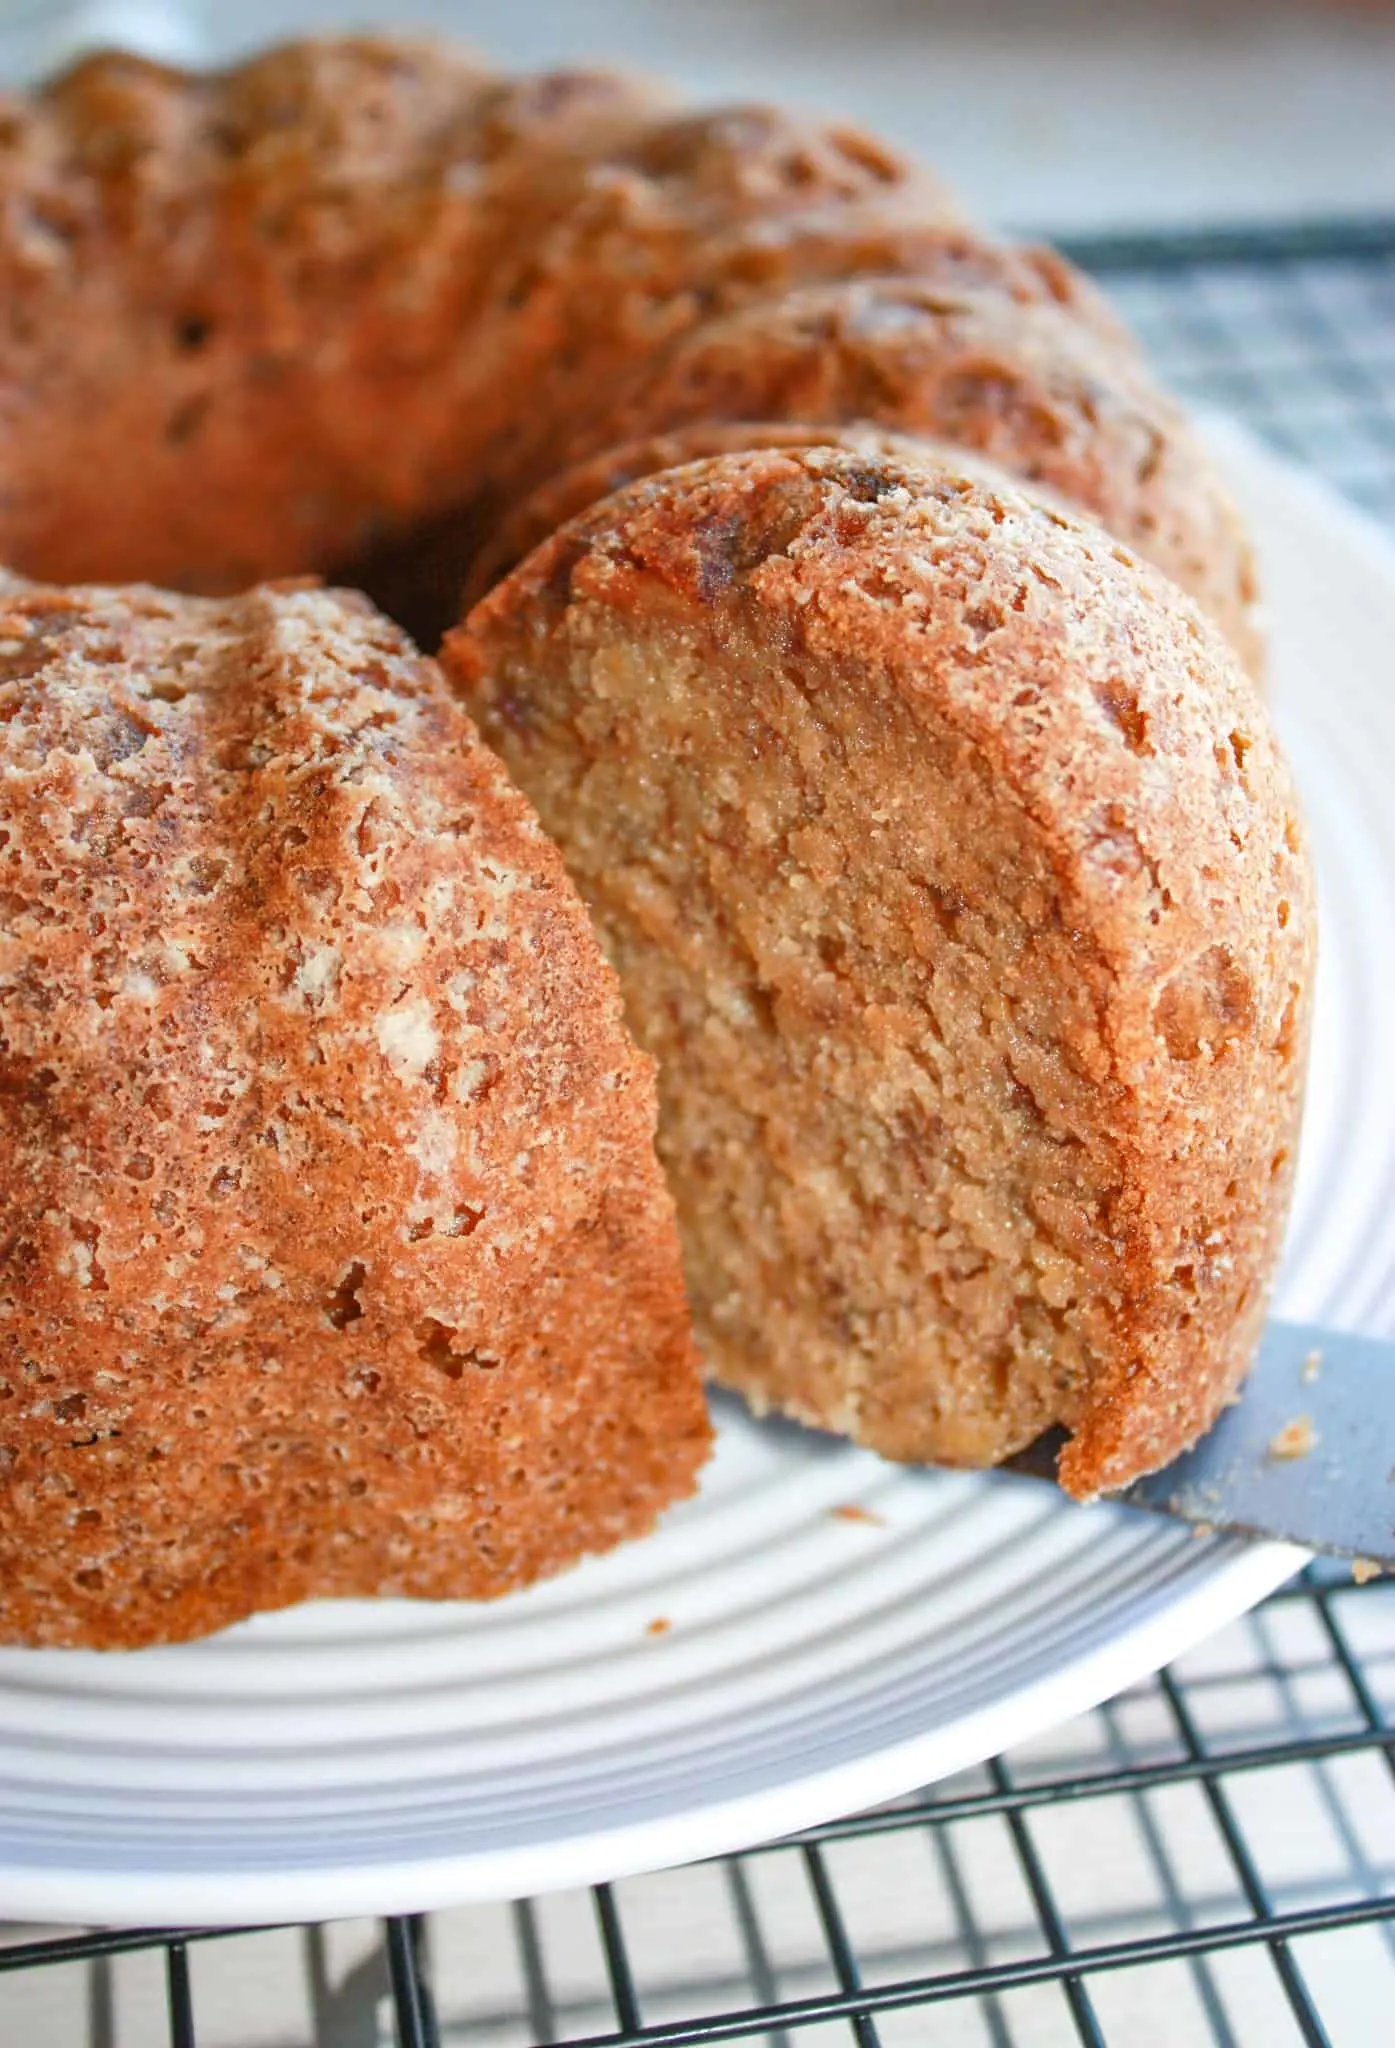 Gluten Free Banana Bread done in the Instant Pot was so moist and delicious.  This easy pressure cooker recipe allowed me to set it and forget it.